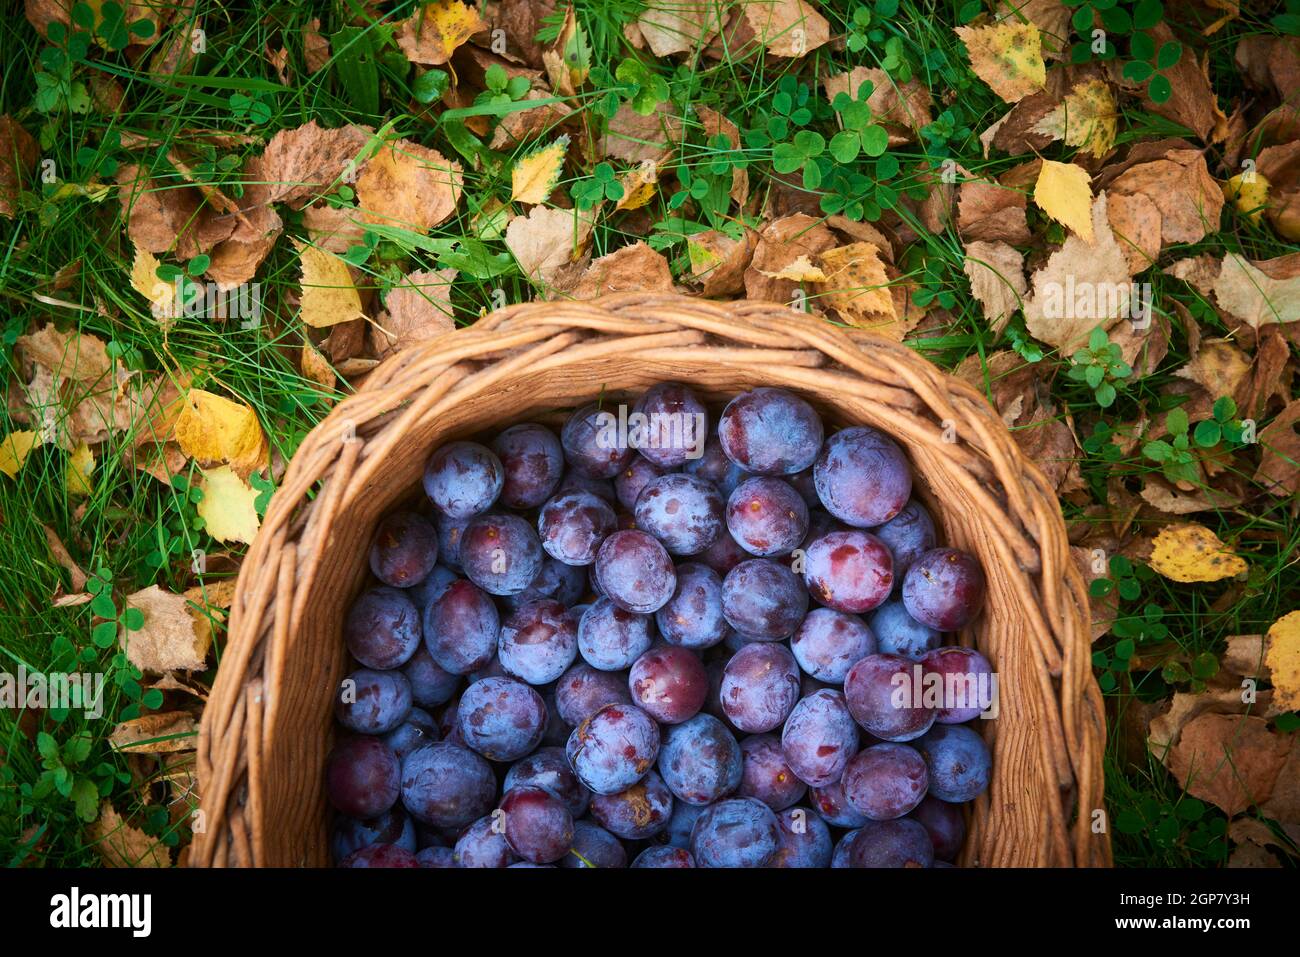 Freshly picked plums in a wicker basket on the grass Stock Photo